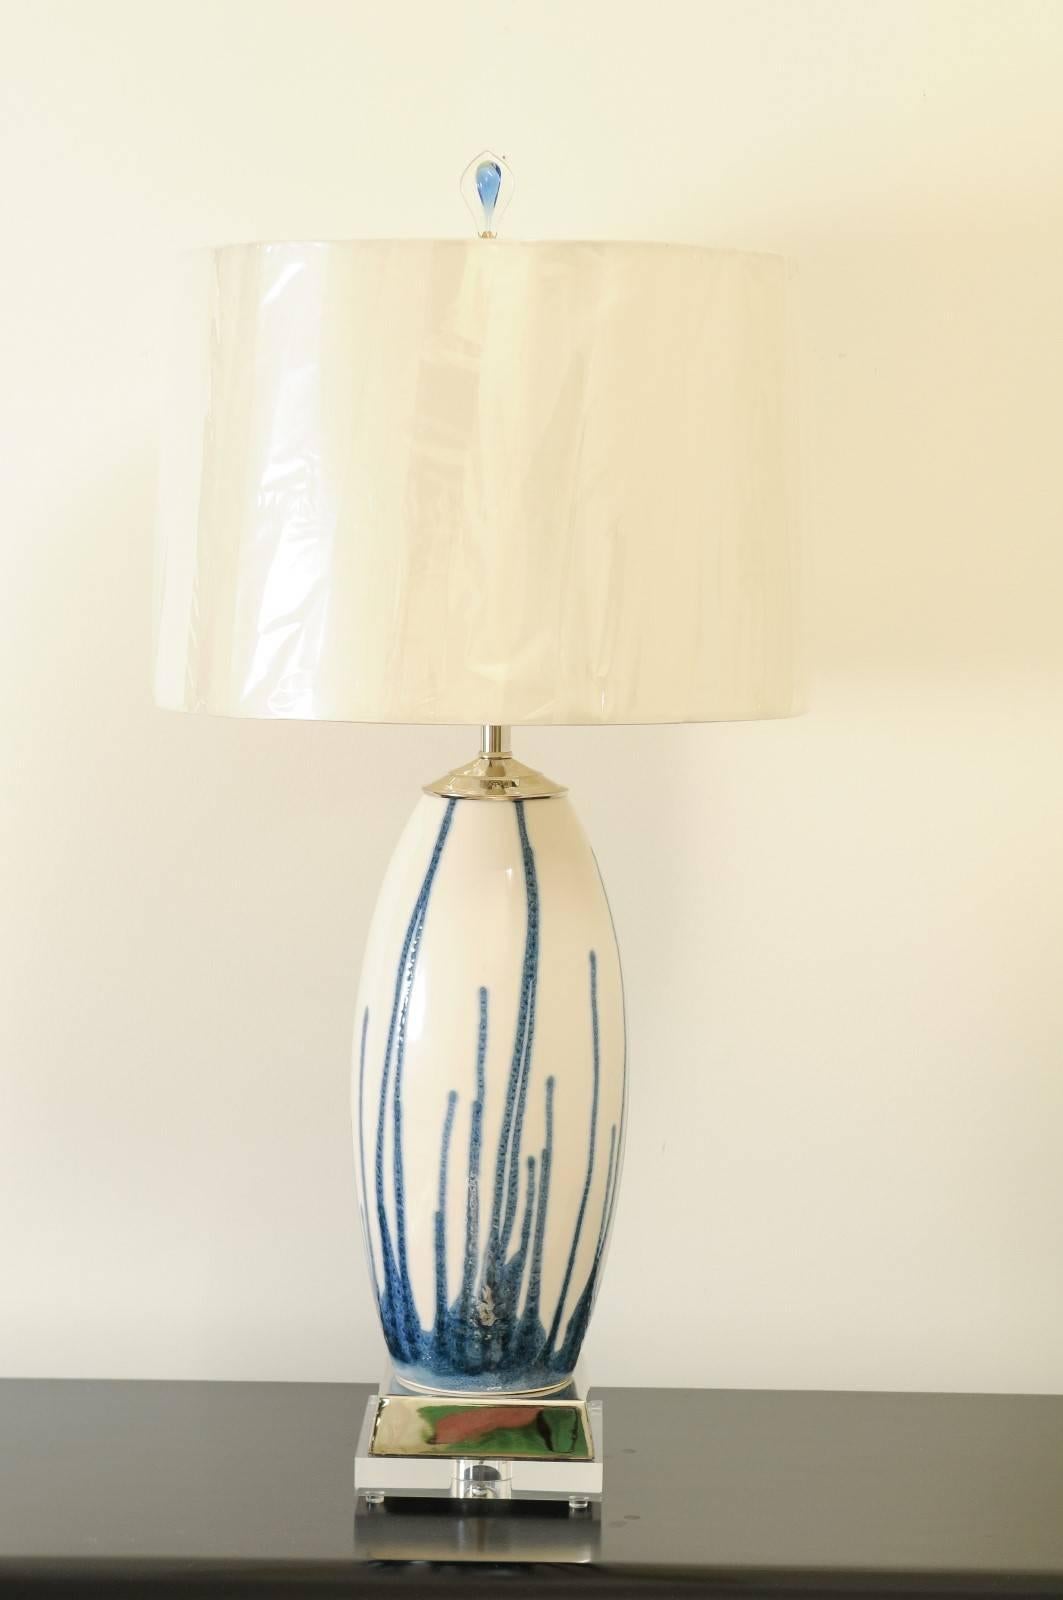 A beautiful pair of handmade Portuguese drip glazed ceramic vessels as custom-made lamps. Fabulous scale and form with accents of polished nickel and Lucite. Custom blown glass finials ice the cake. Exceptionally crafted pieces using components of